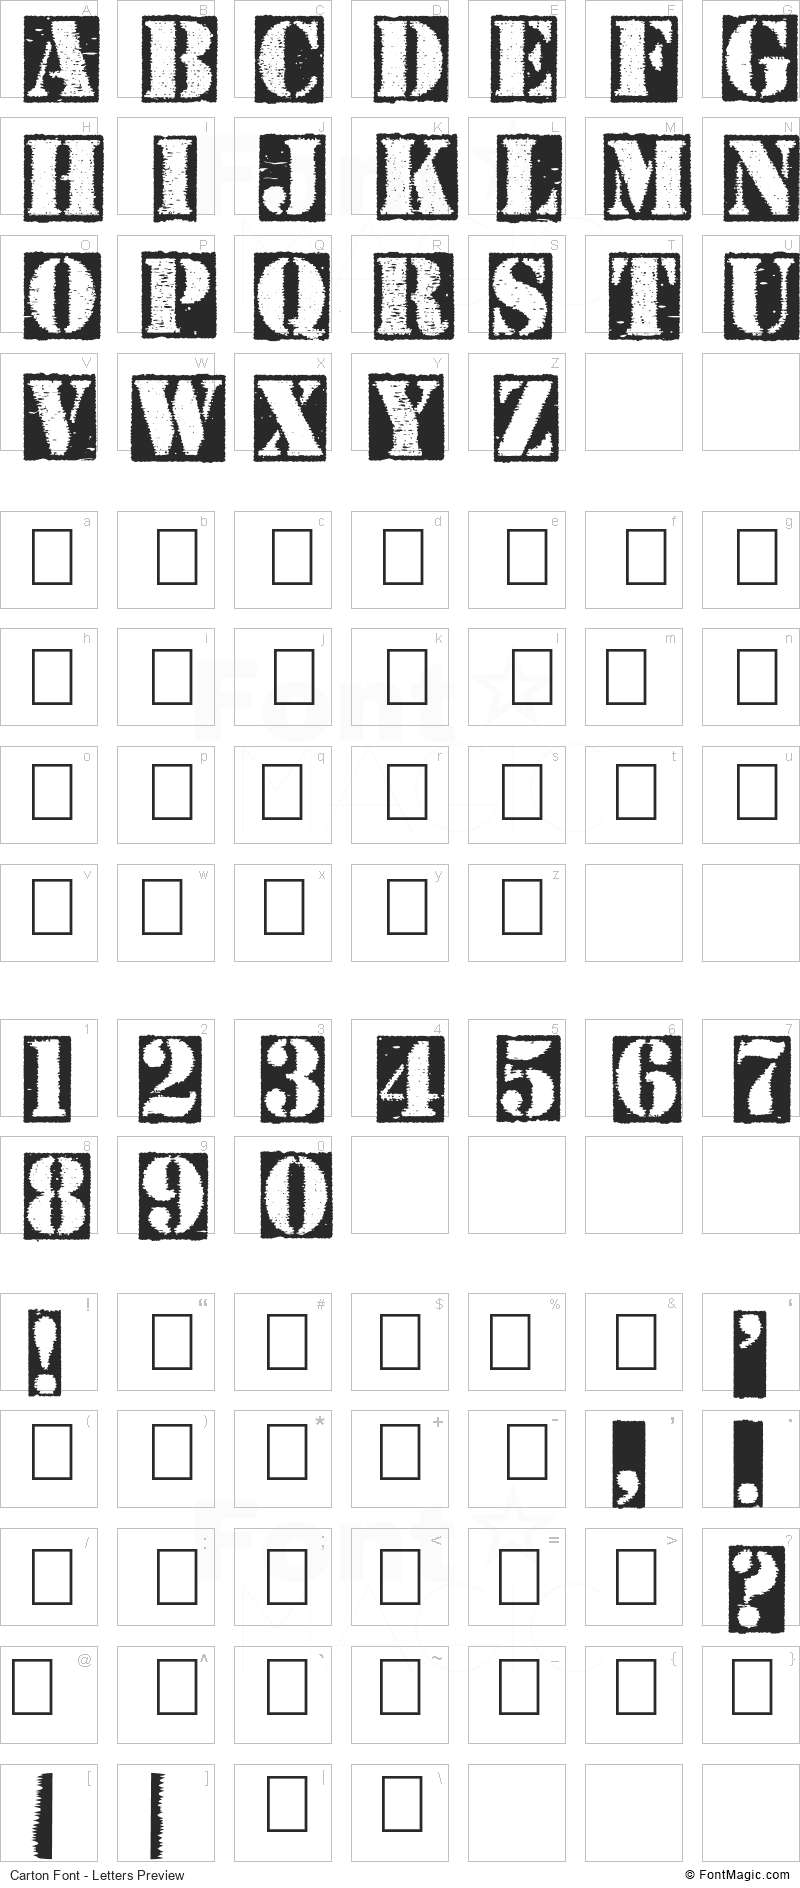 Carton Font - All Latters Preview Chart